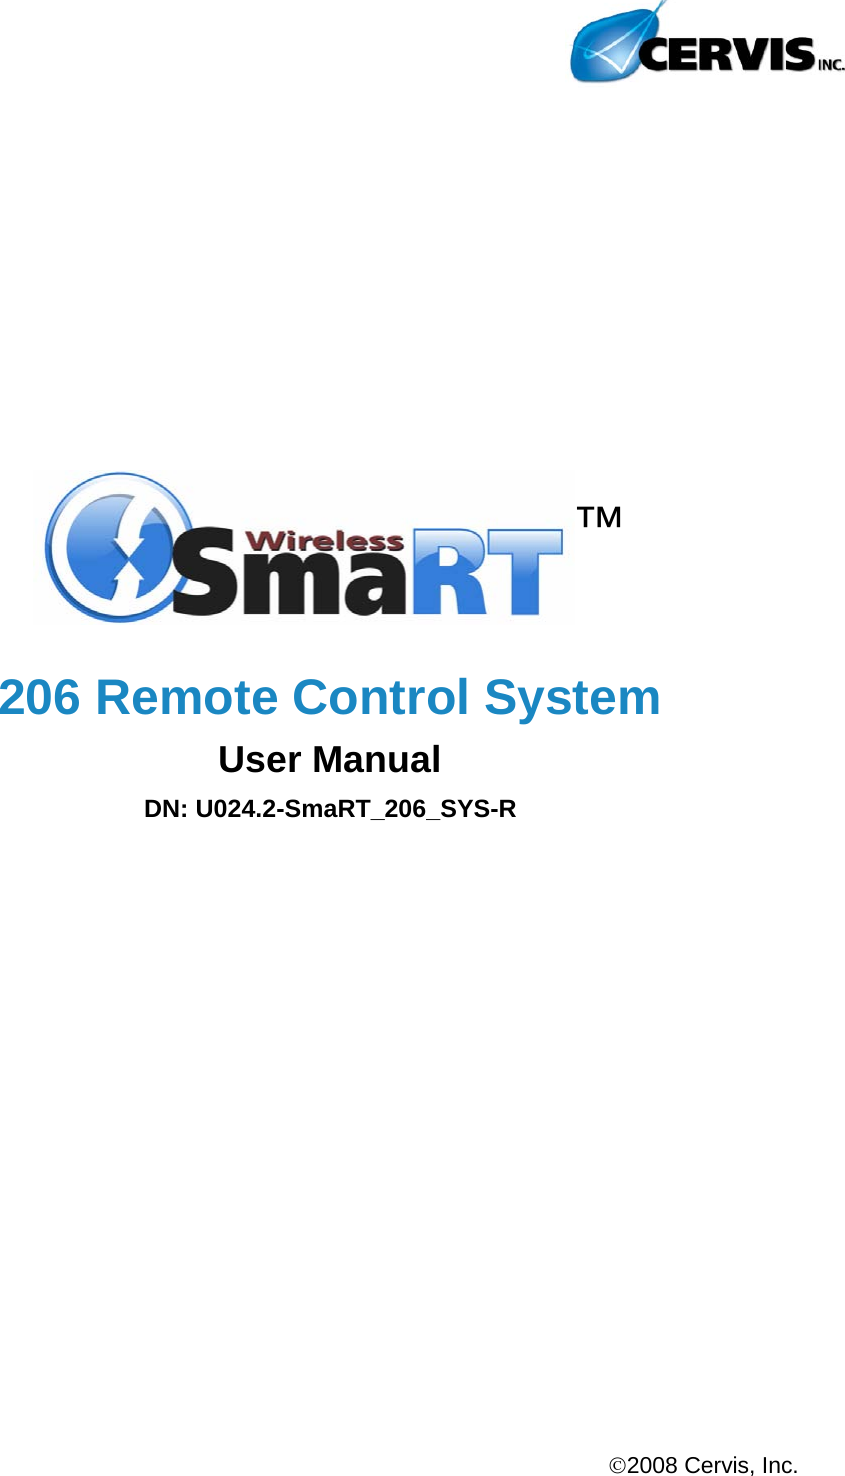  2008 Cervis, Inc.    206 Remote Control System User Manual DN: U024.2-SmaRT_206_SYS-R ™ 